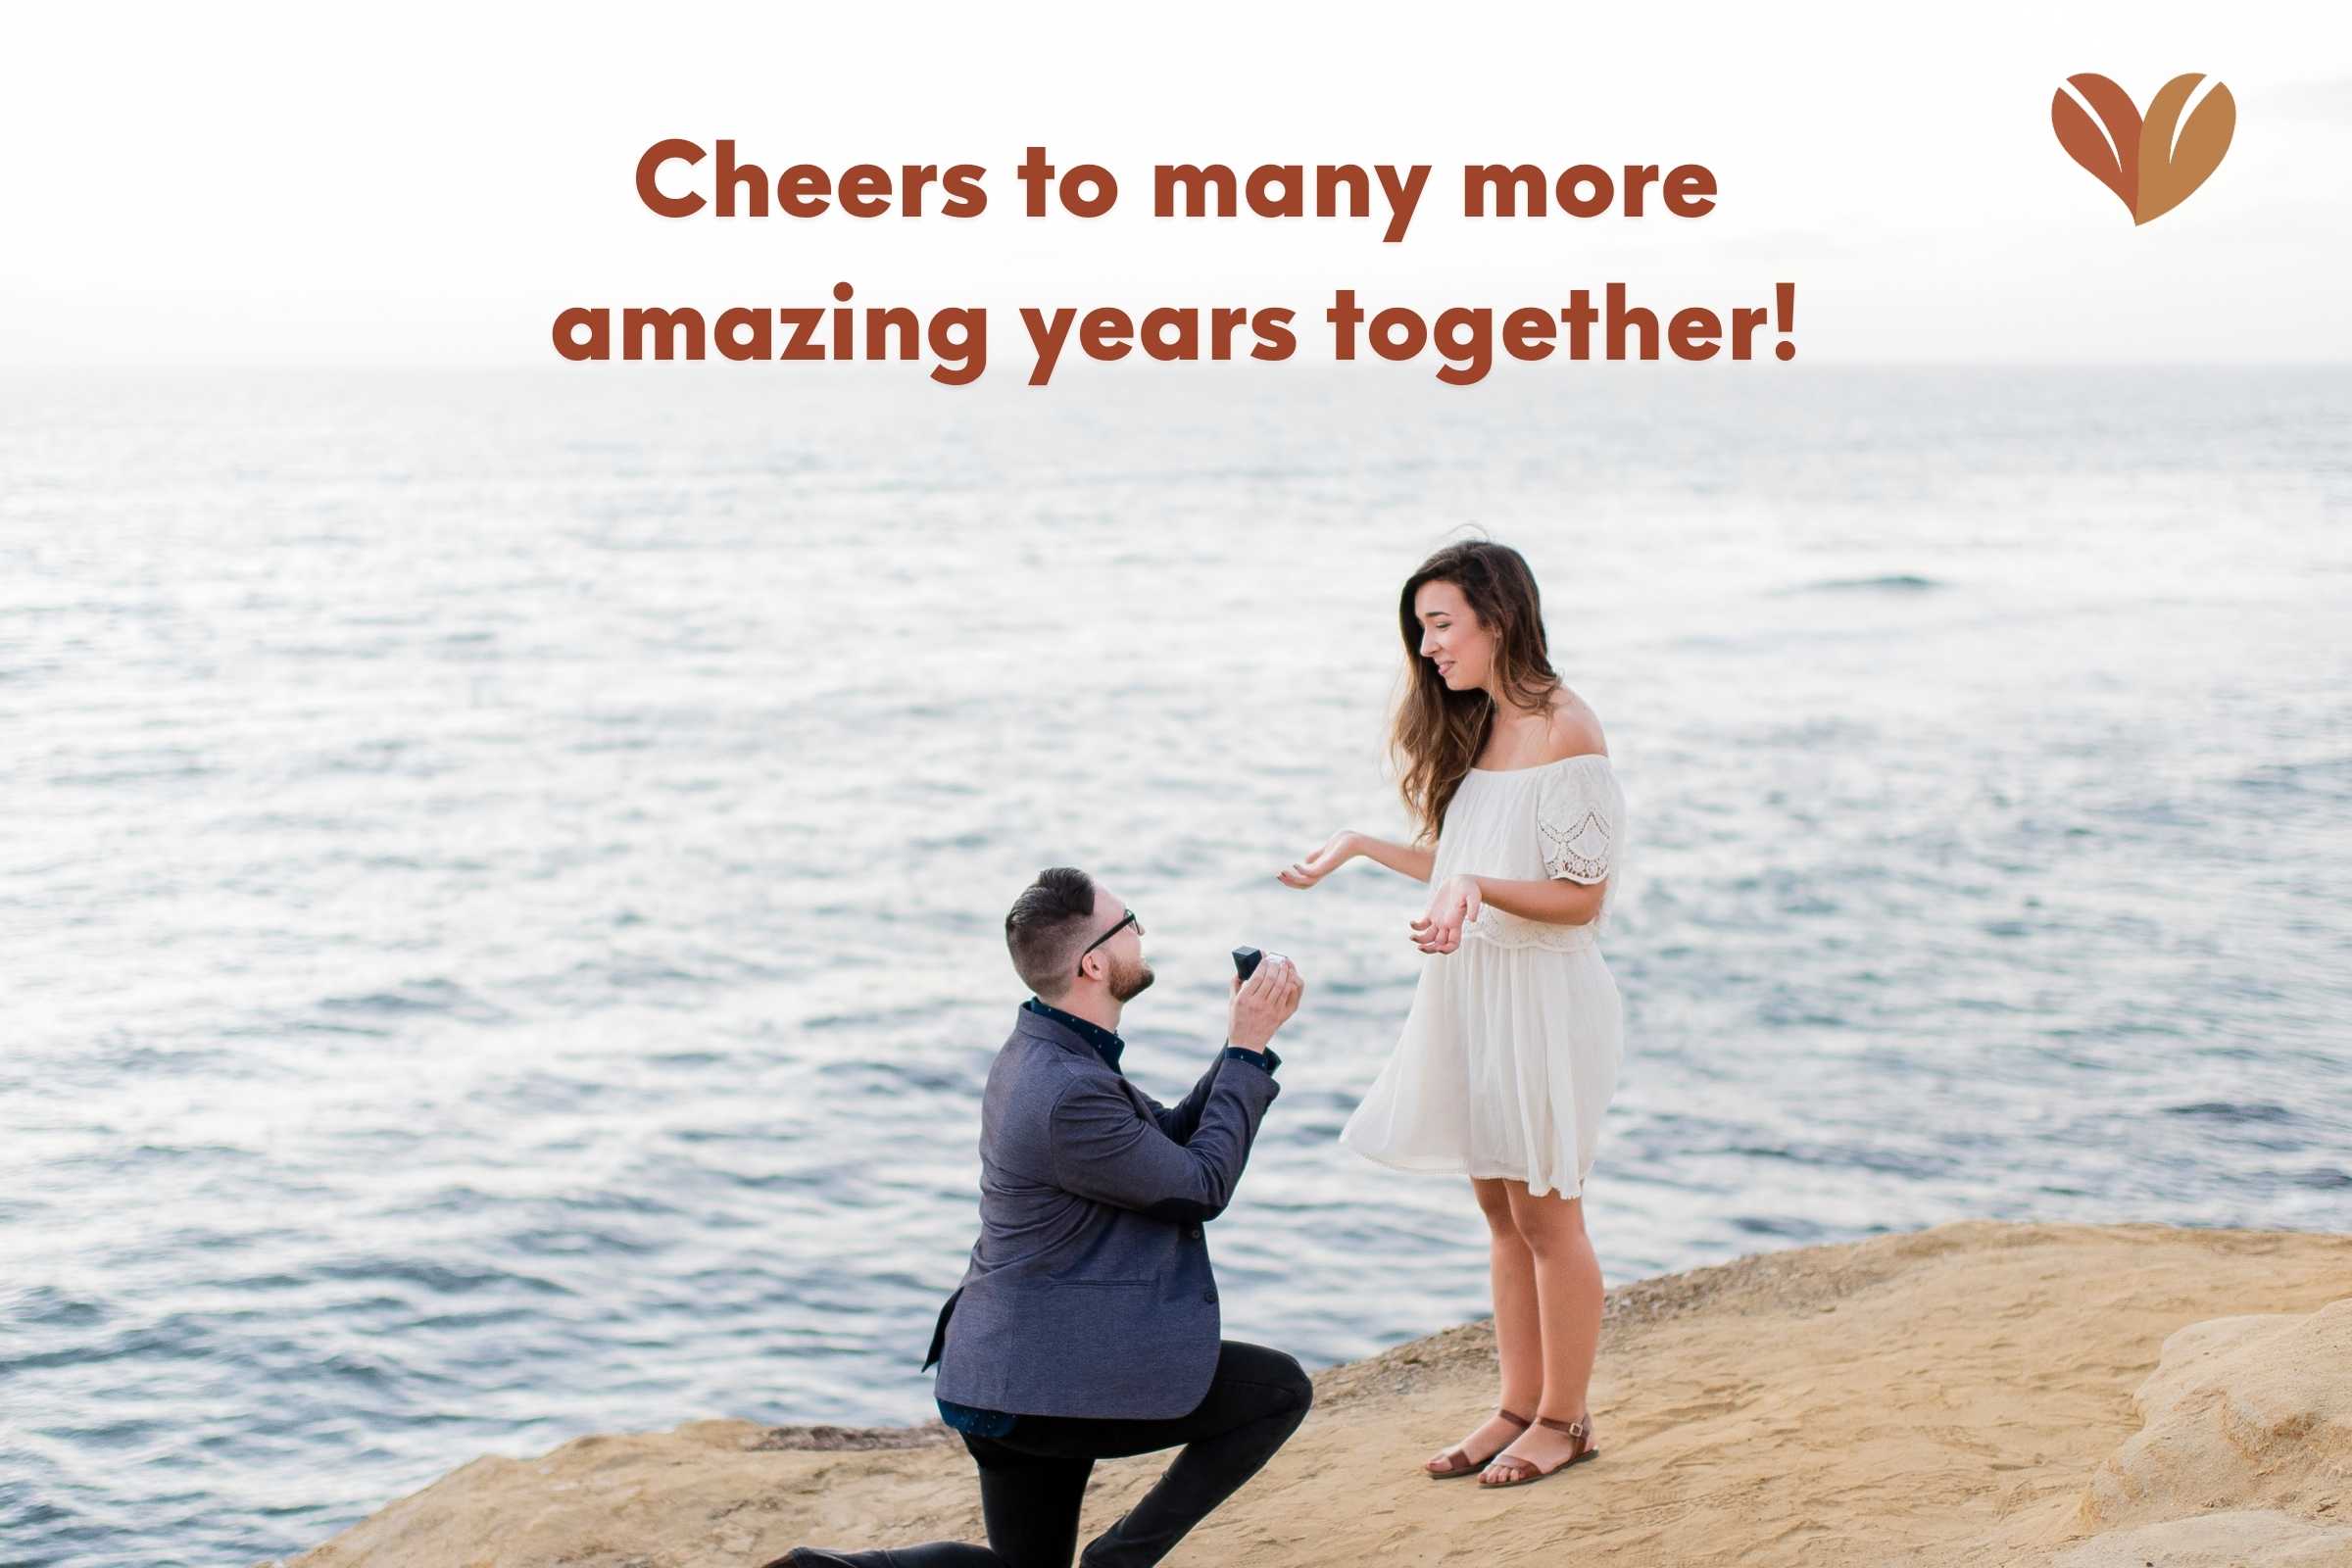 Cheers to the wonderful journey of love, happy anniversary daughter and son in law!